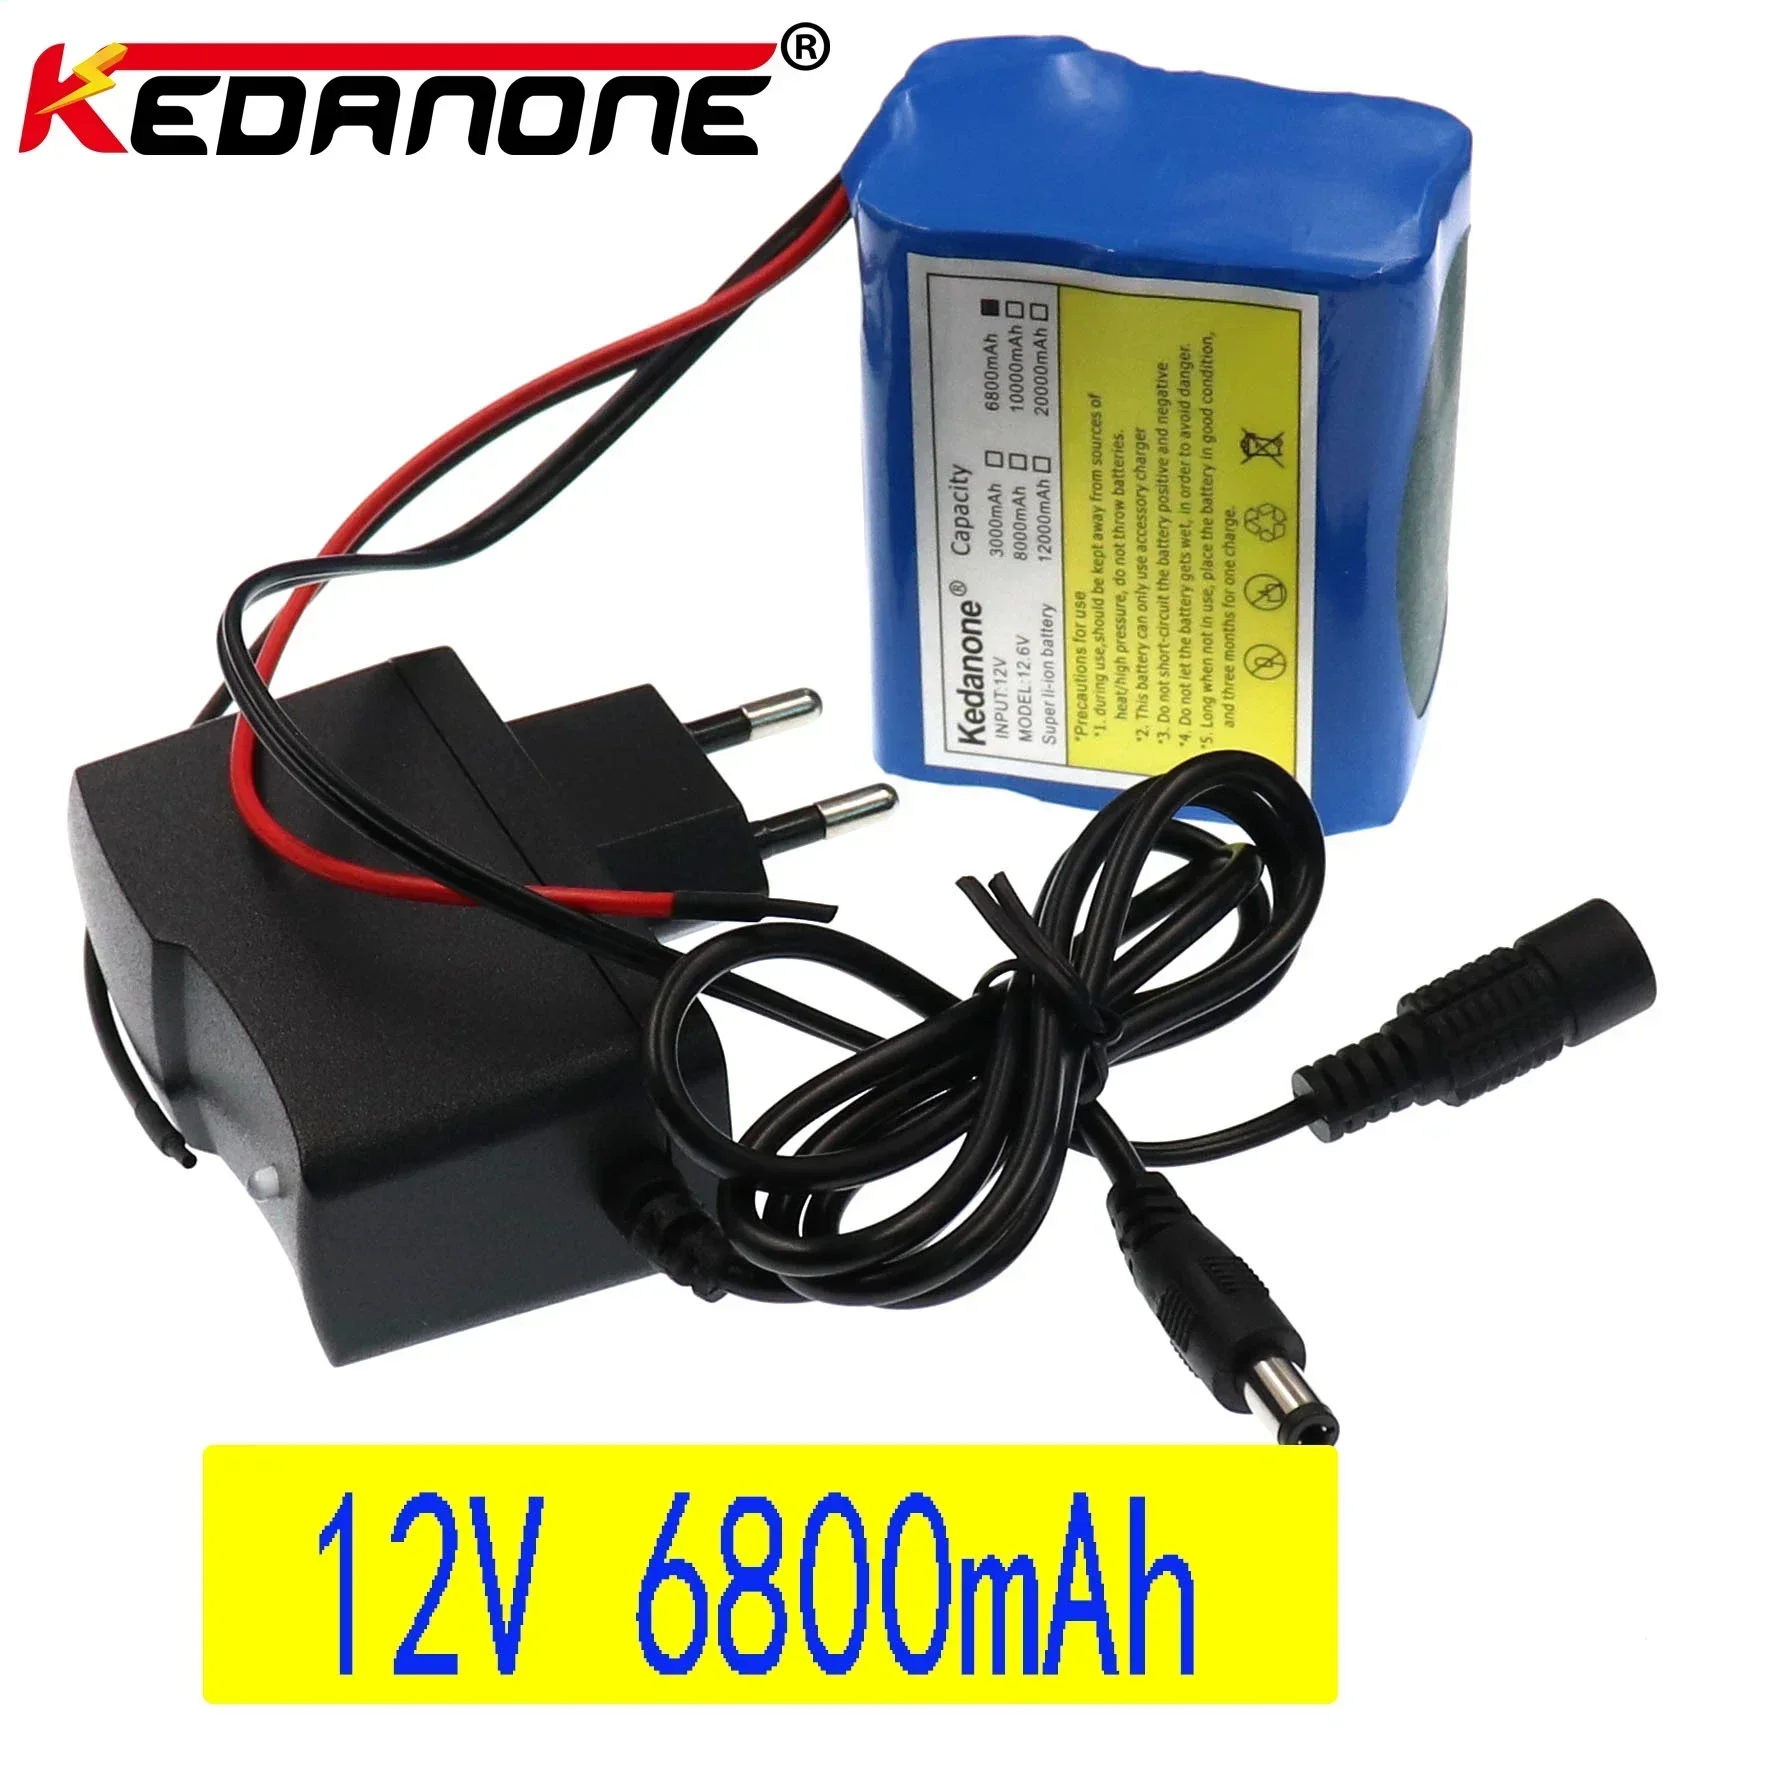 12V battery 6800mah 18650 Lithium Ion 6.8 Ah rechargeable battery with BMS Protective Plate Lithium Battery Pack, 12.6 v Charger